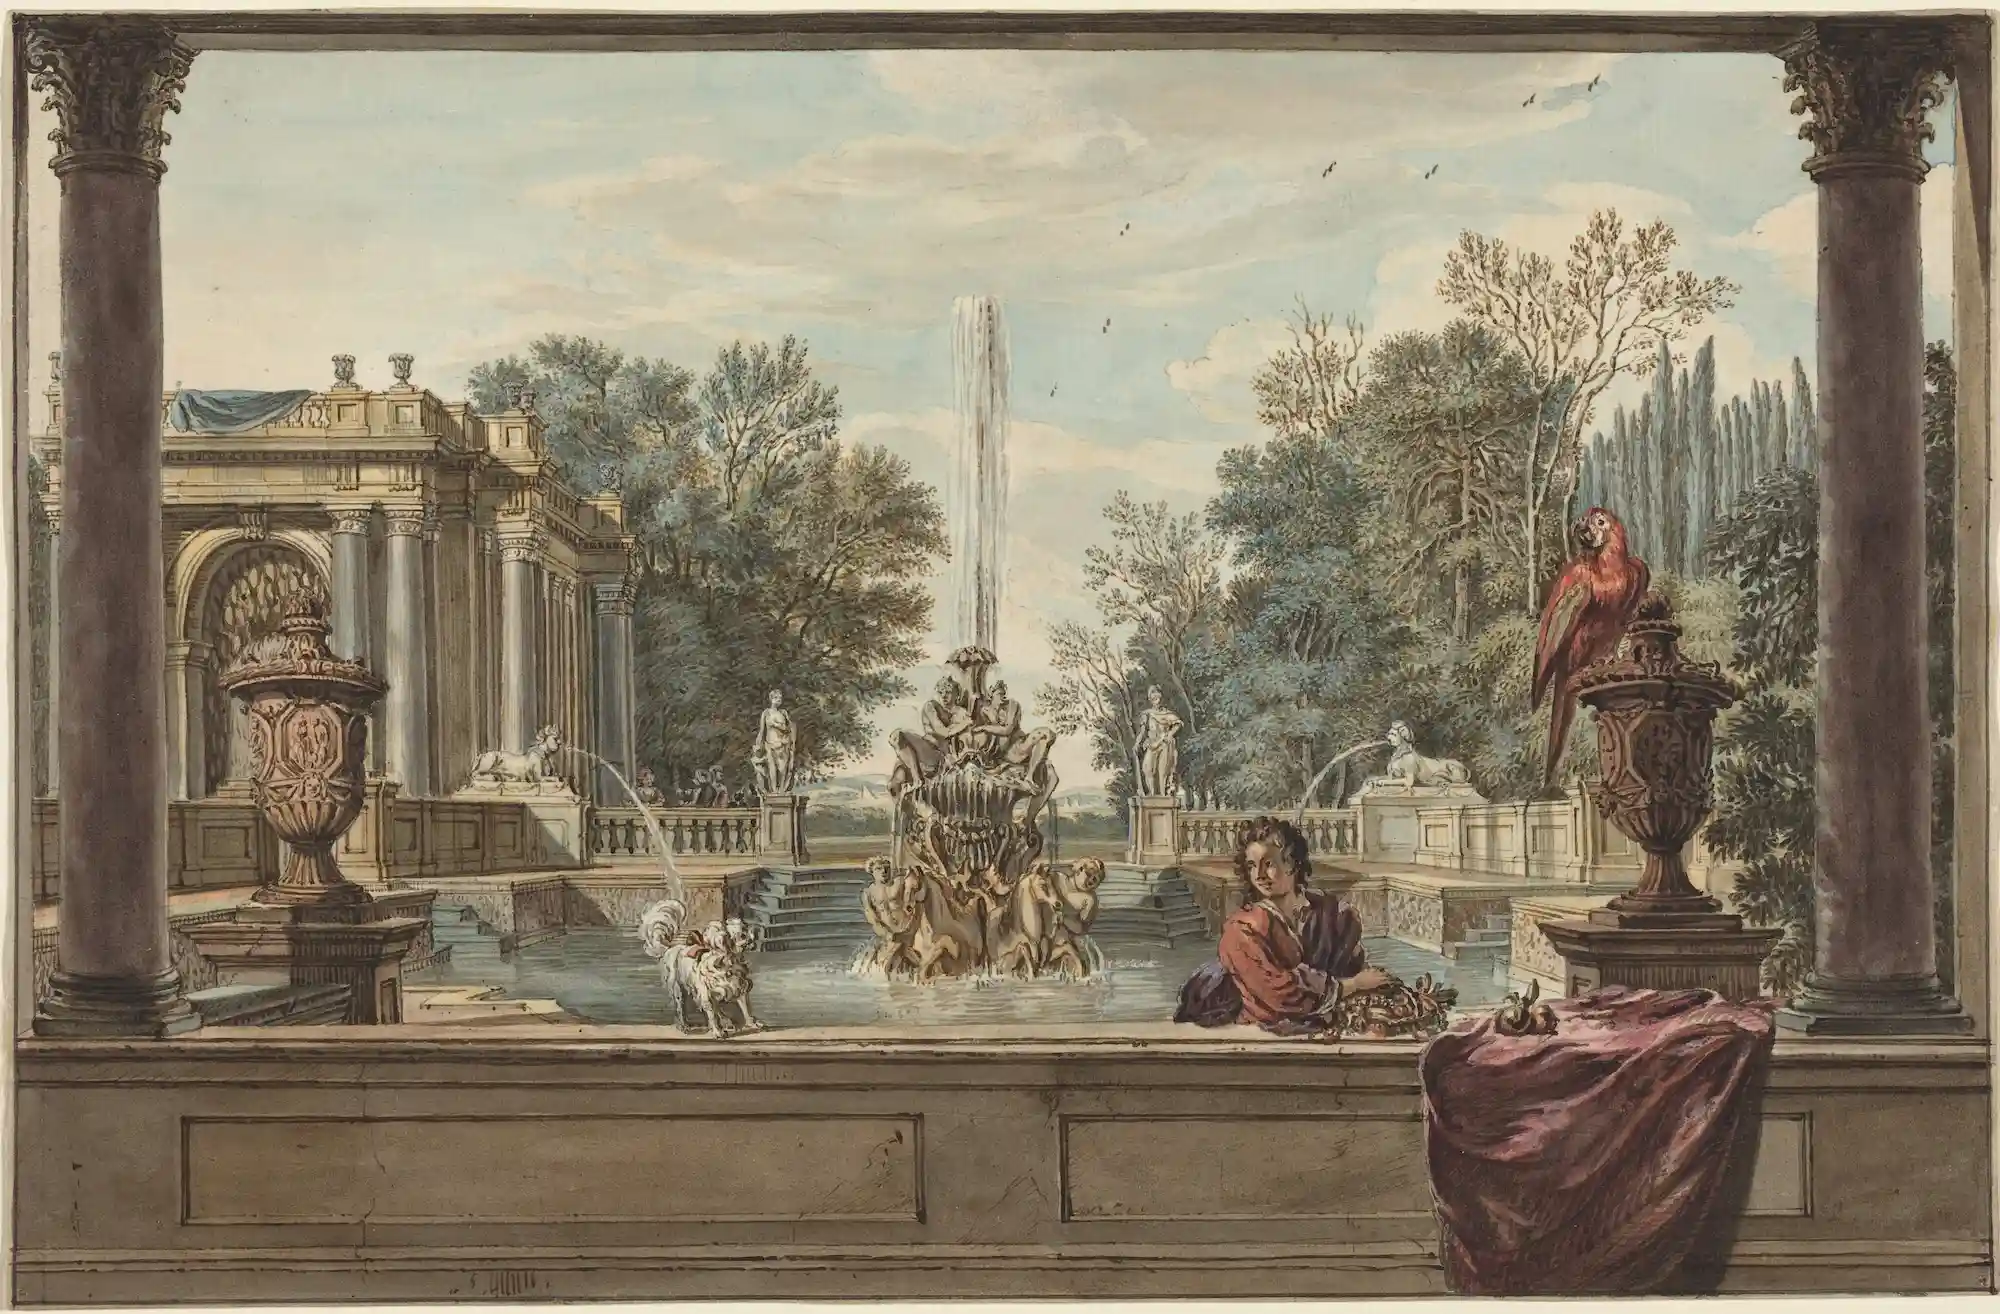 An Italianate Garden with a Parrot, a Poodle, and a Man, by Isaac de Moucheron